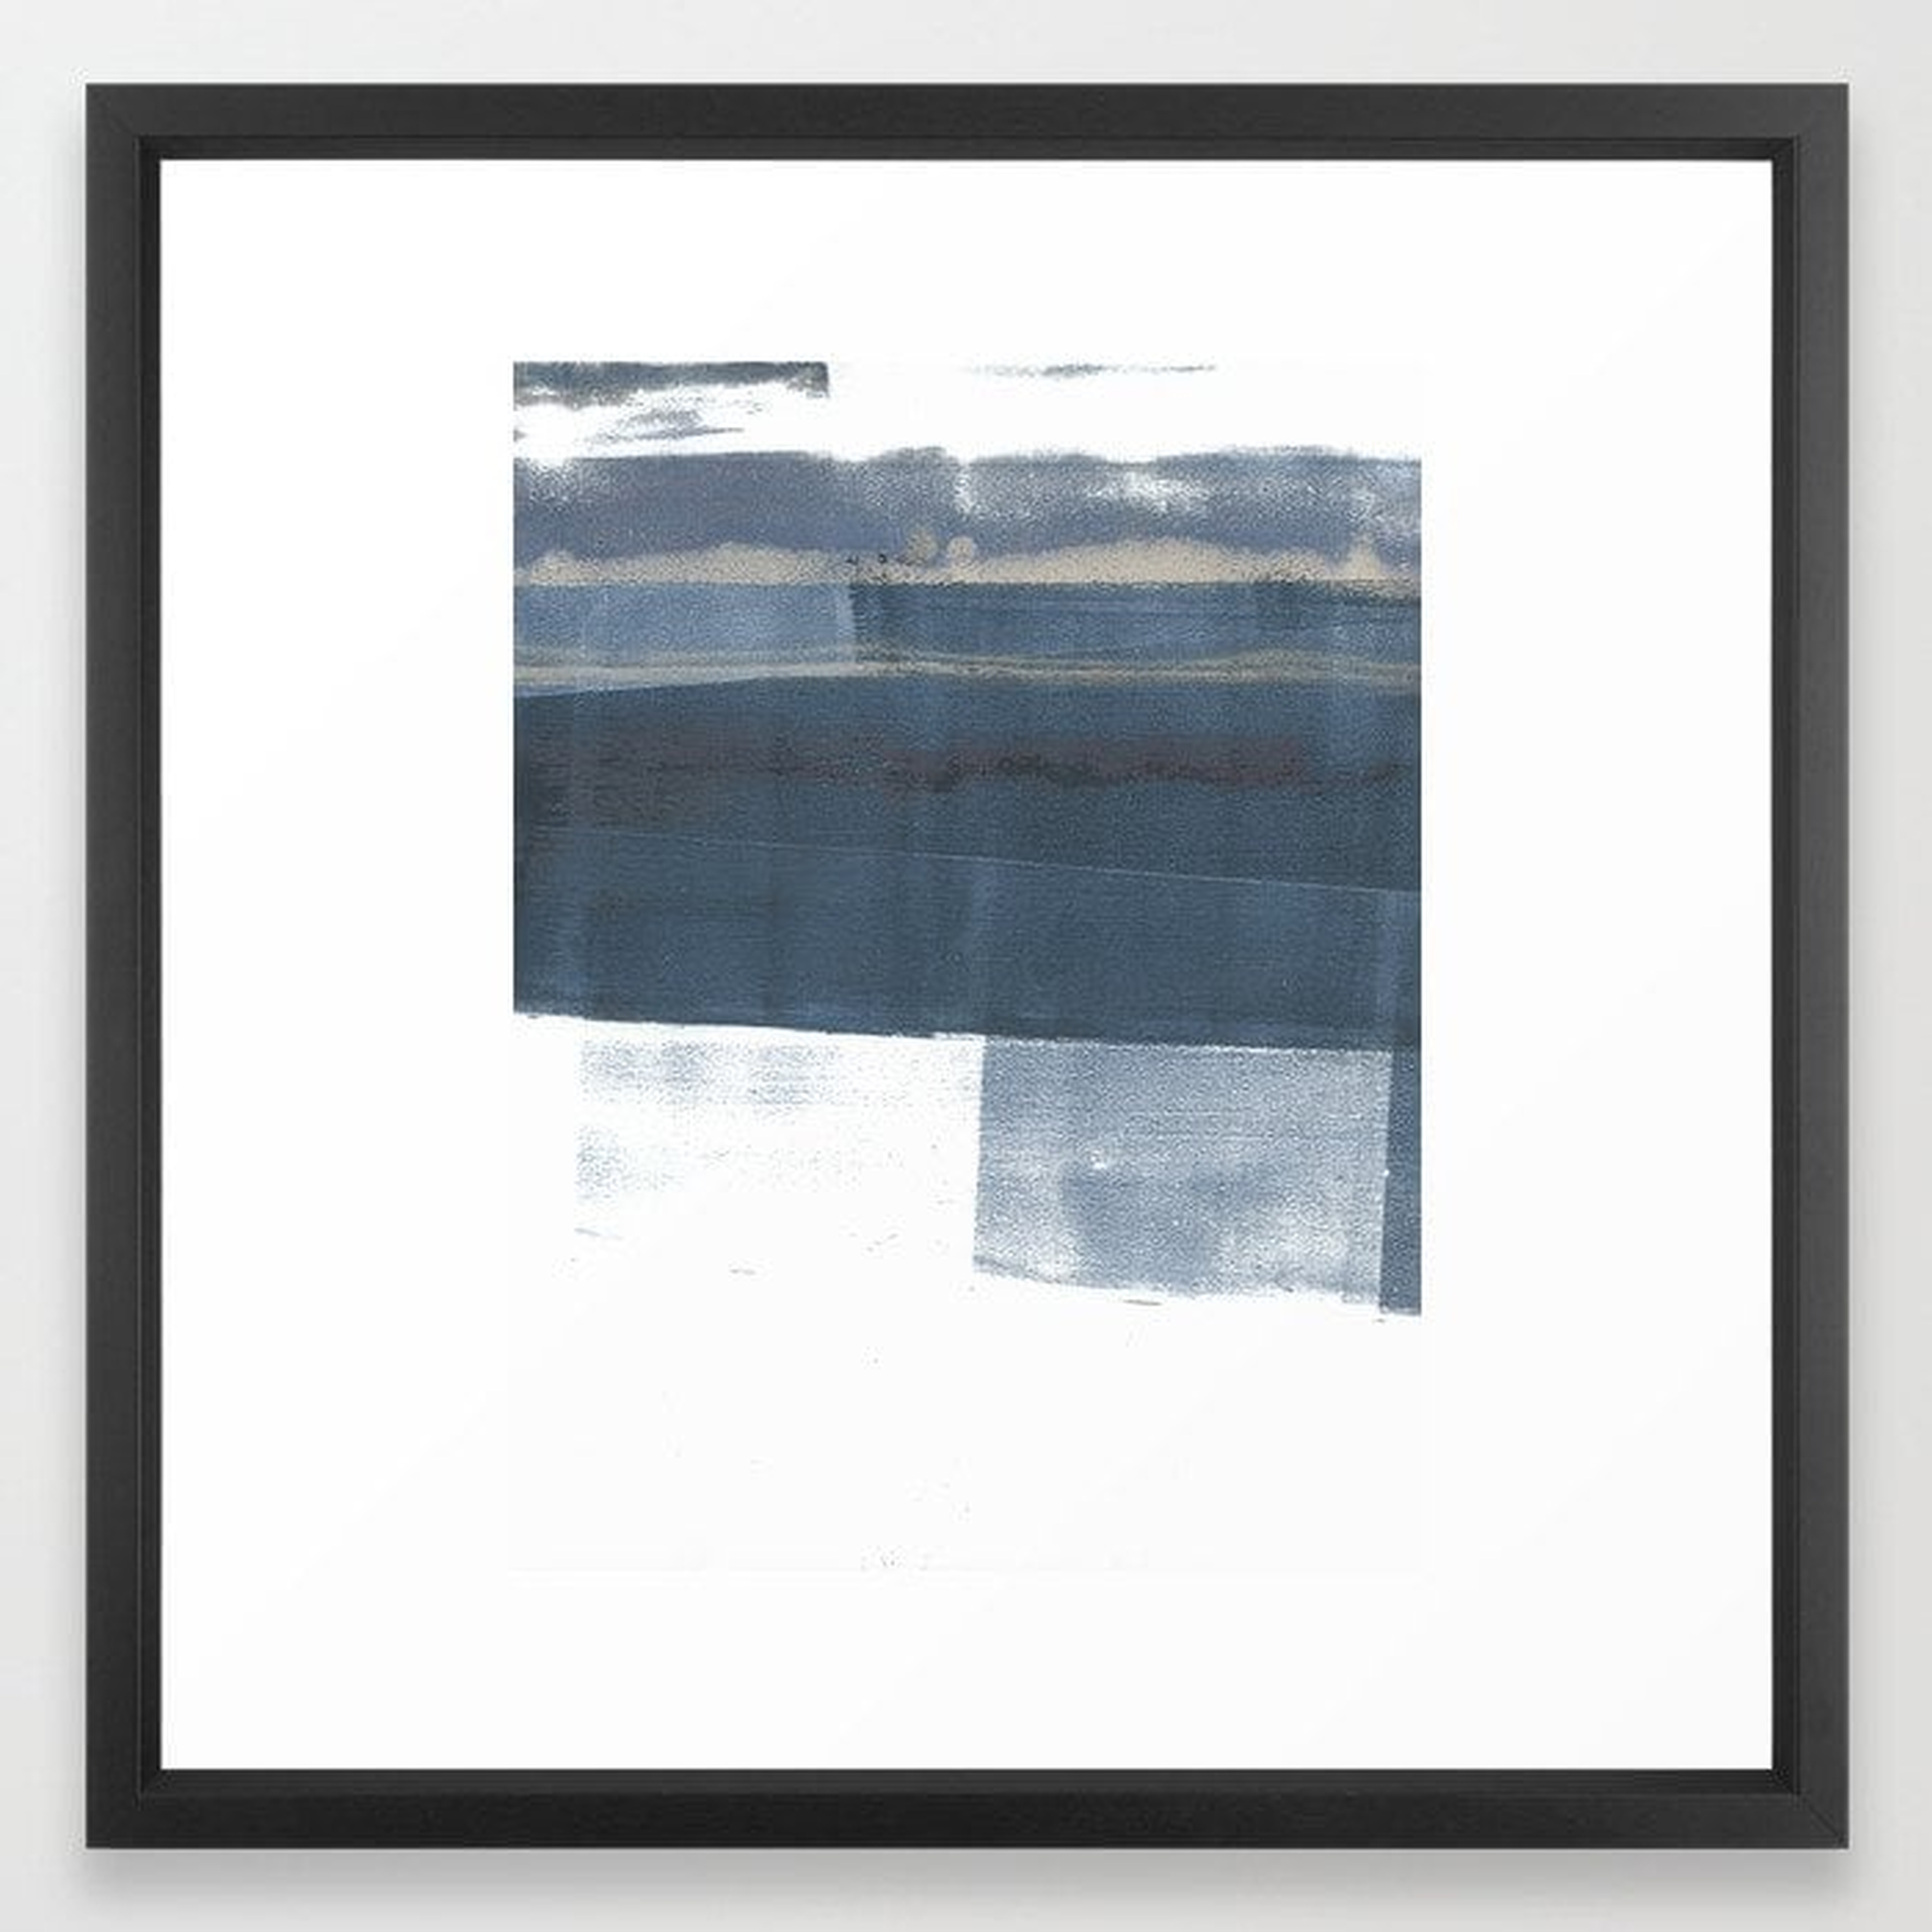 Blue and White Minimalist Abstract Landscape Framed Art Print, 22" x 22", Vector black frame - Society6